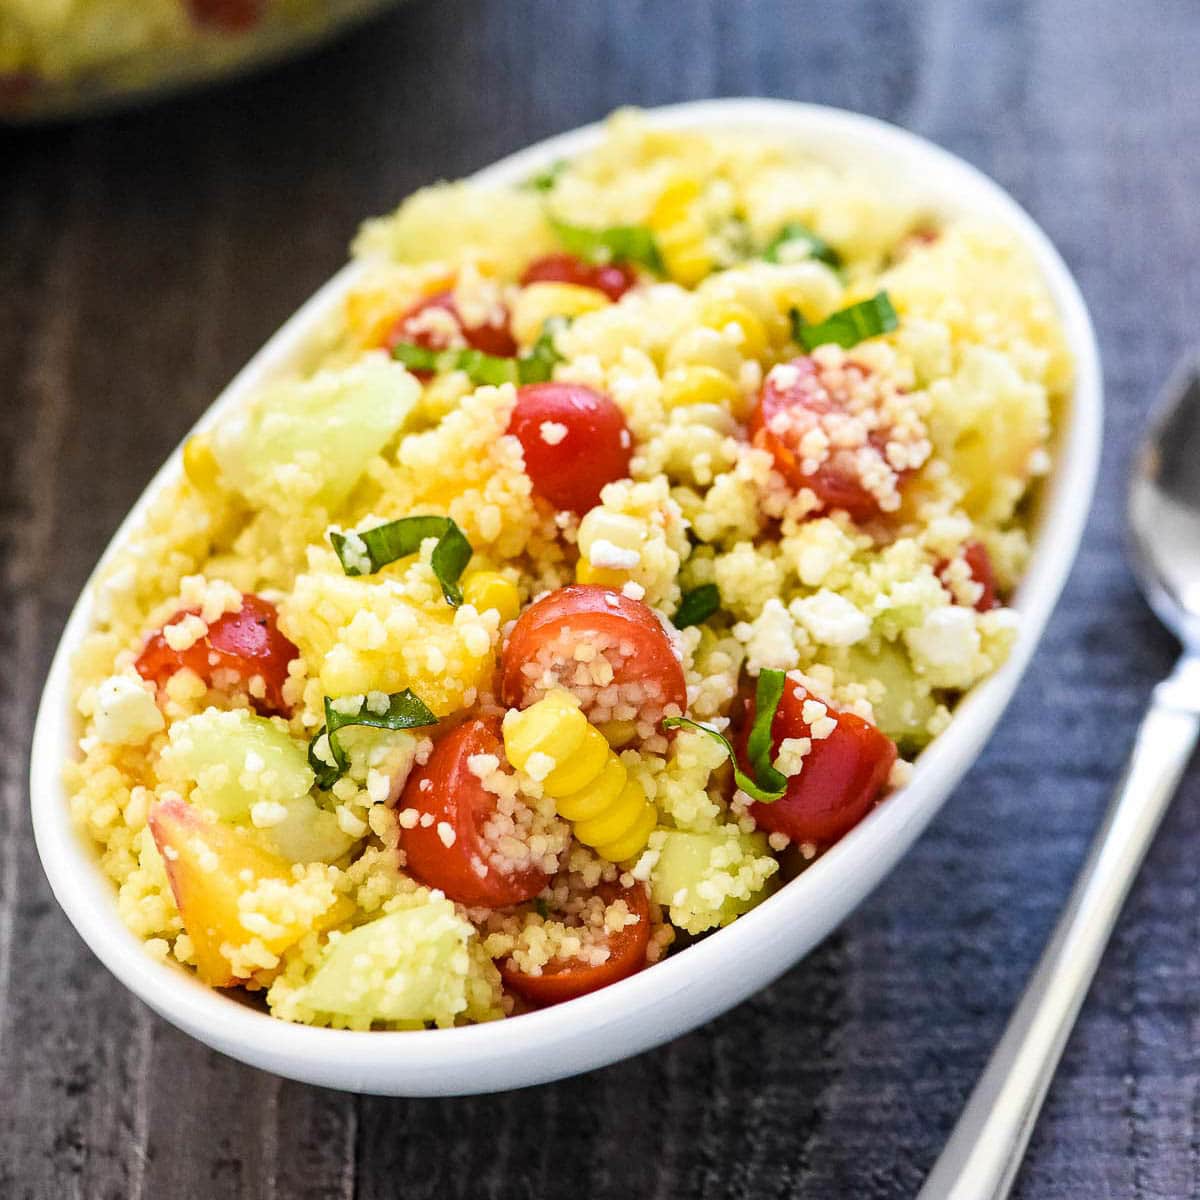 Couscous Salad in white bowl with spoon on table.